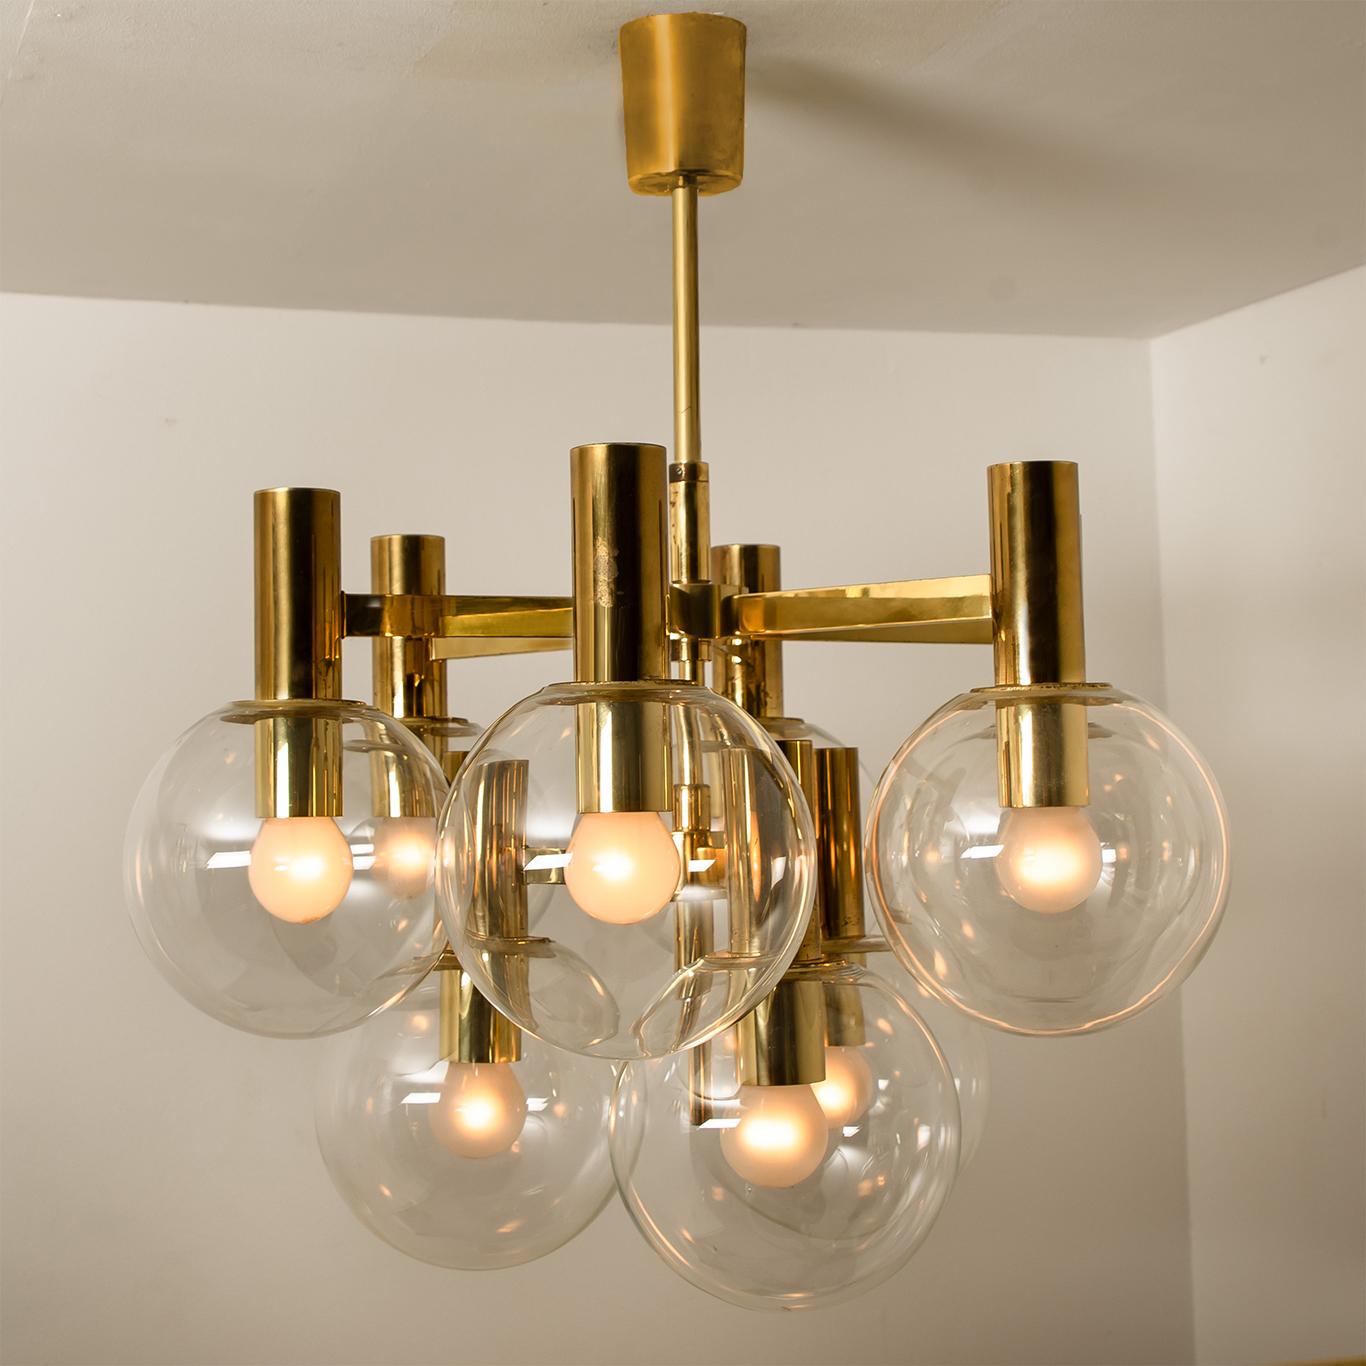 A rare multi-globe Mid-Century Modern set of a chandelier and two wall lights with clear glass globes. The chandeliers are 9-armed and the wall lights are 2 armed. Designed in the style of Hans Agne Jakobsson. Illuminates beautifully.

Dimensions